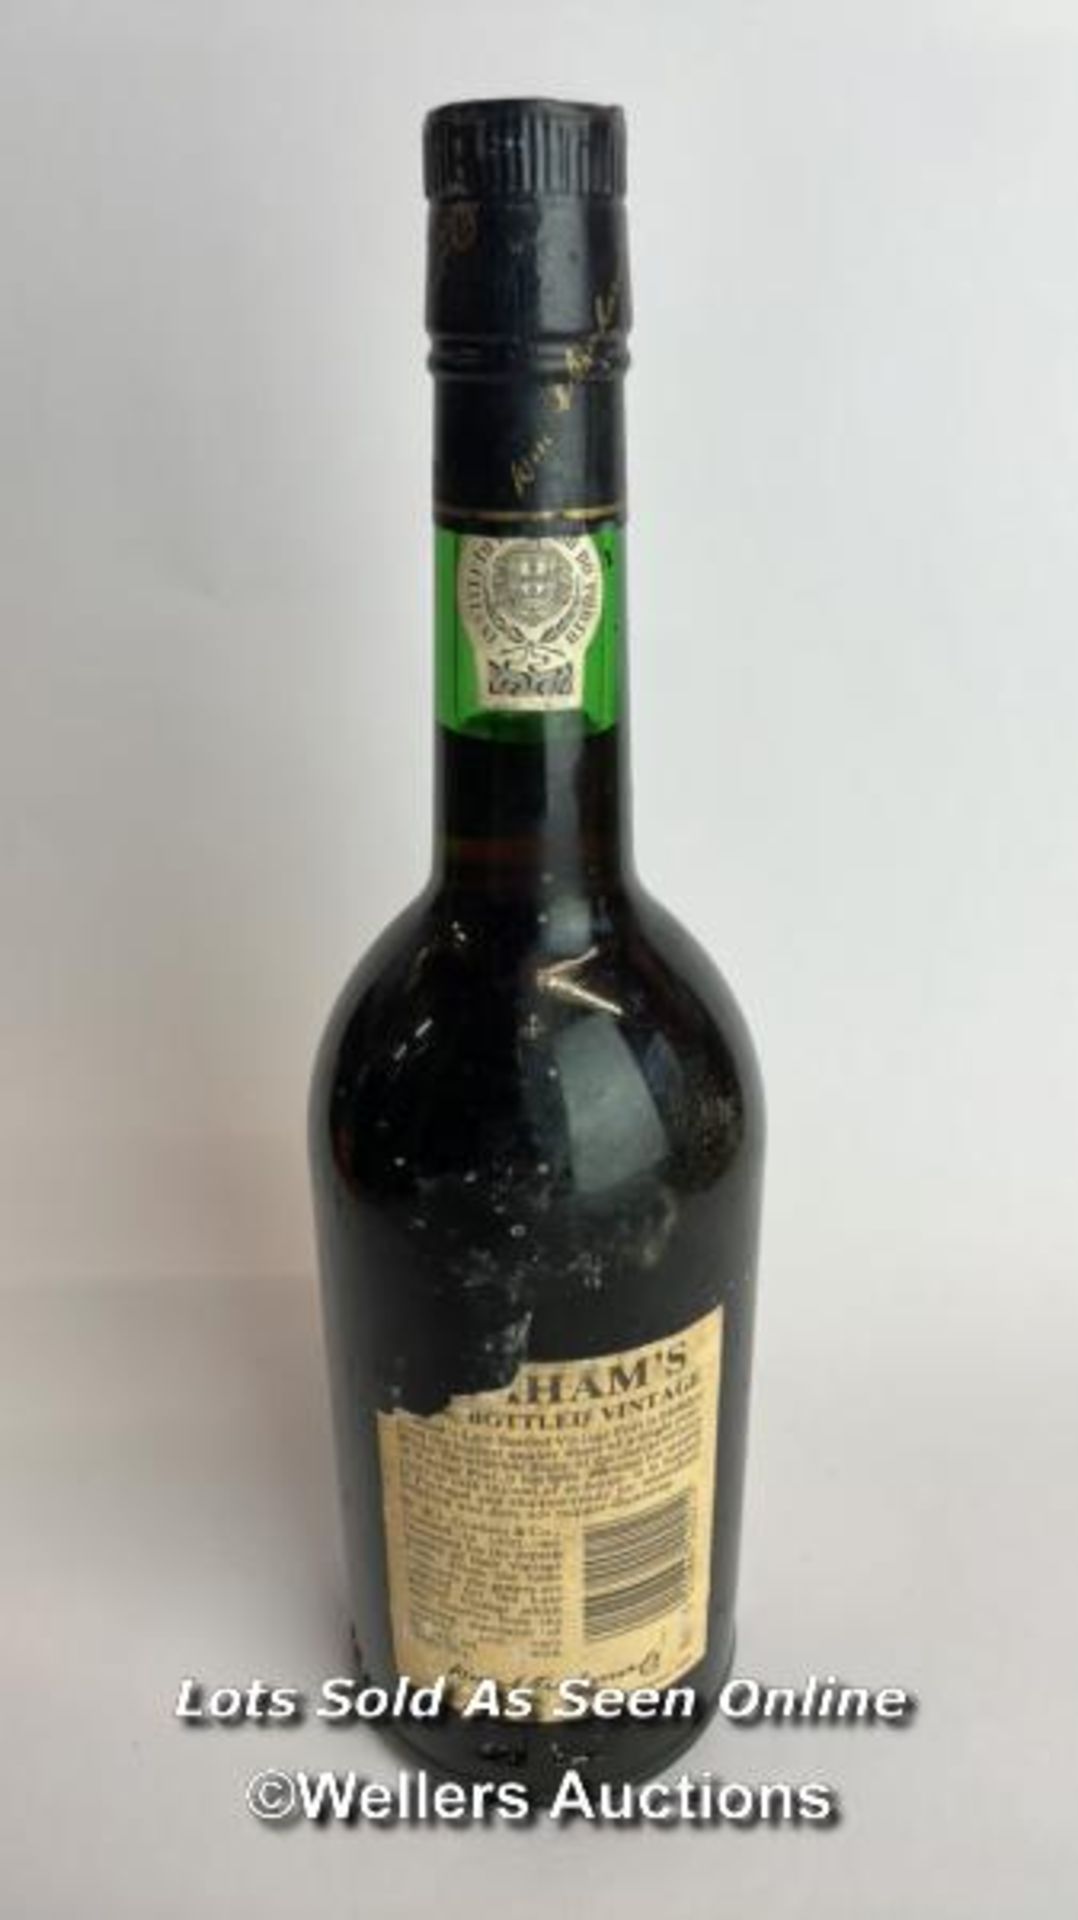 Graham's Late bottled vintage 1981 port, 70cl, 20% vol / Please see images for fill level and - Image 6 of 7